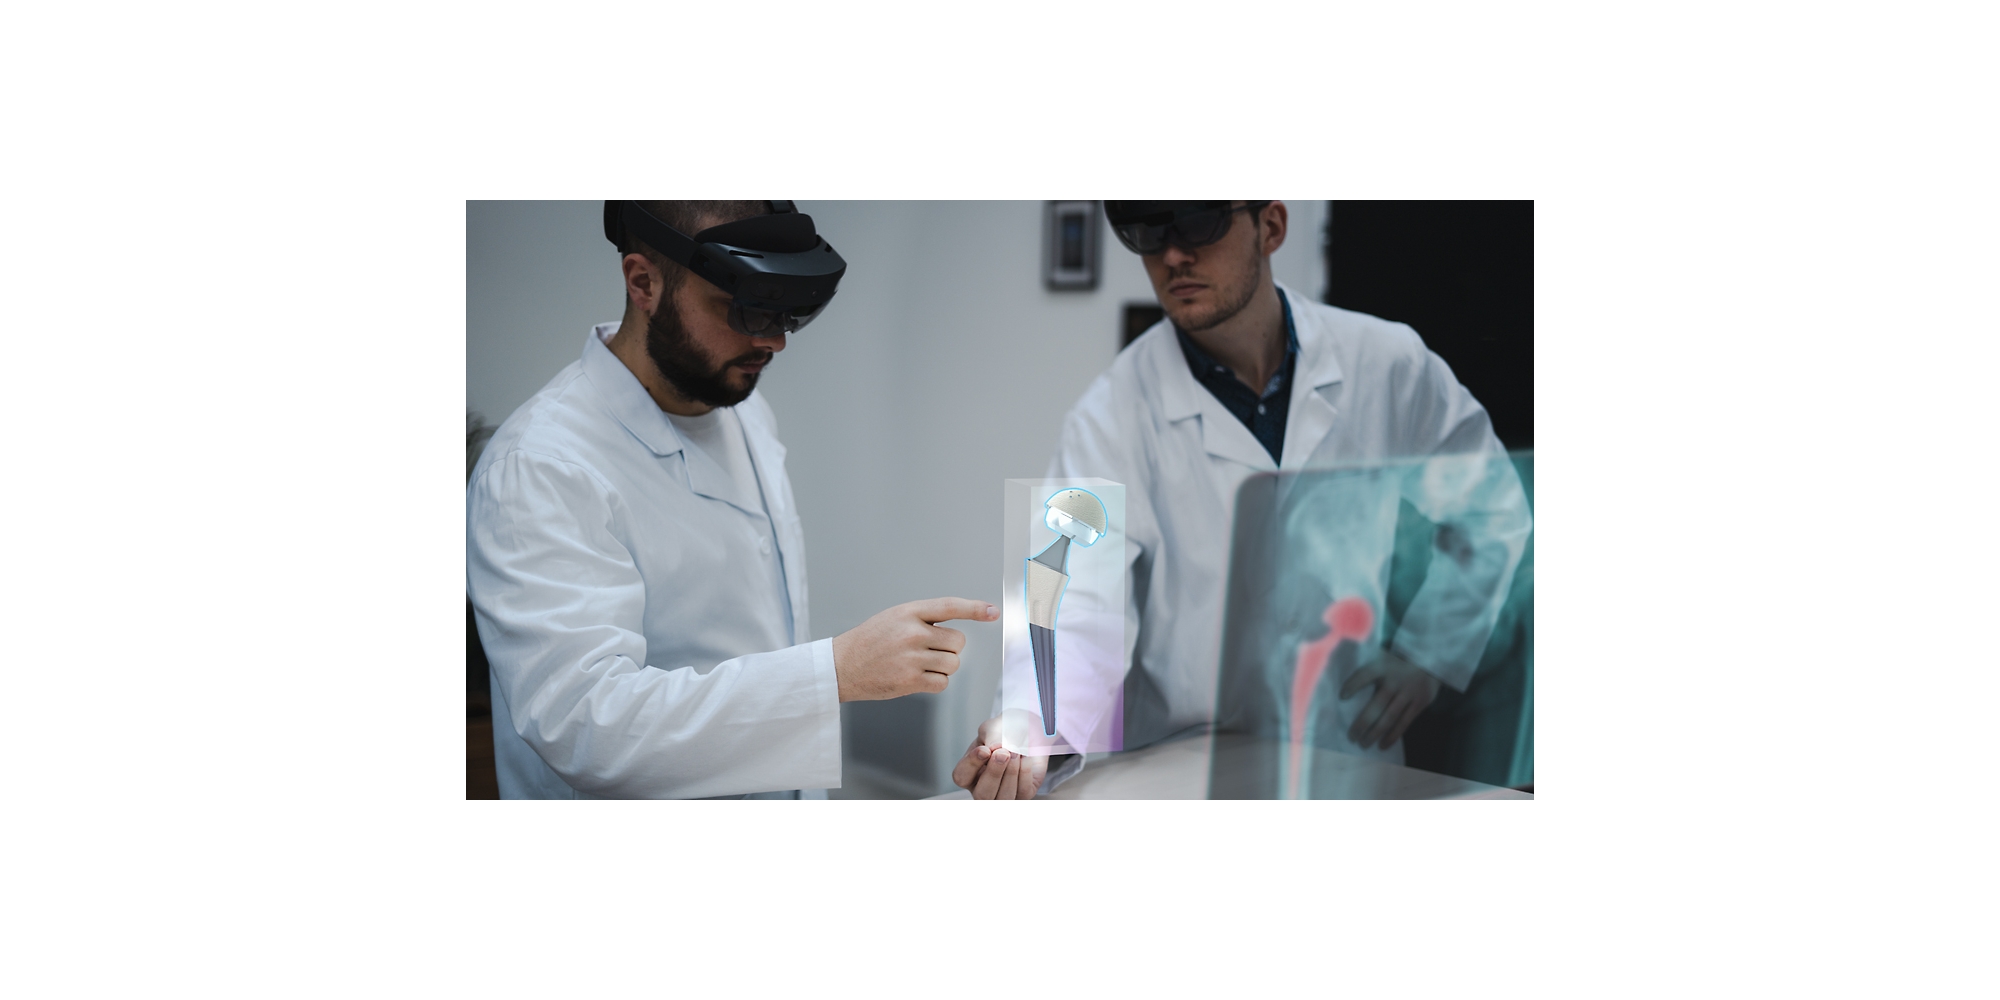 Two healthcare professionals using HoloLens 2 devices to look at an x-ray in mixed reality.